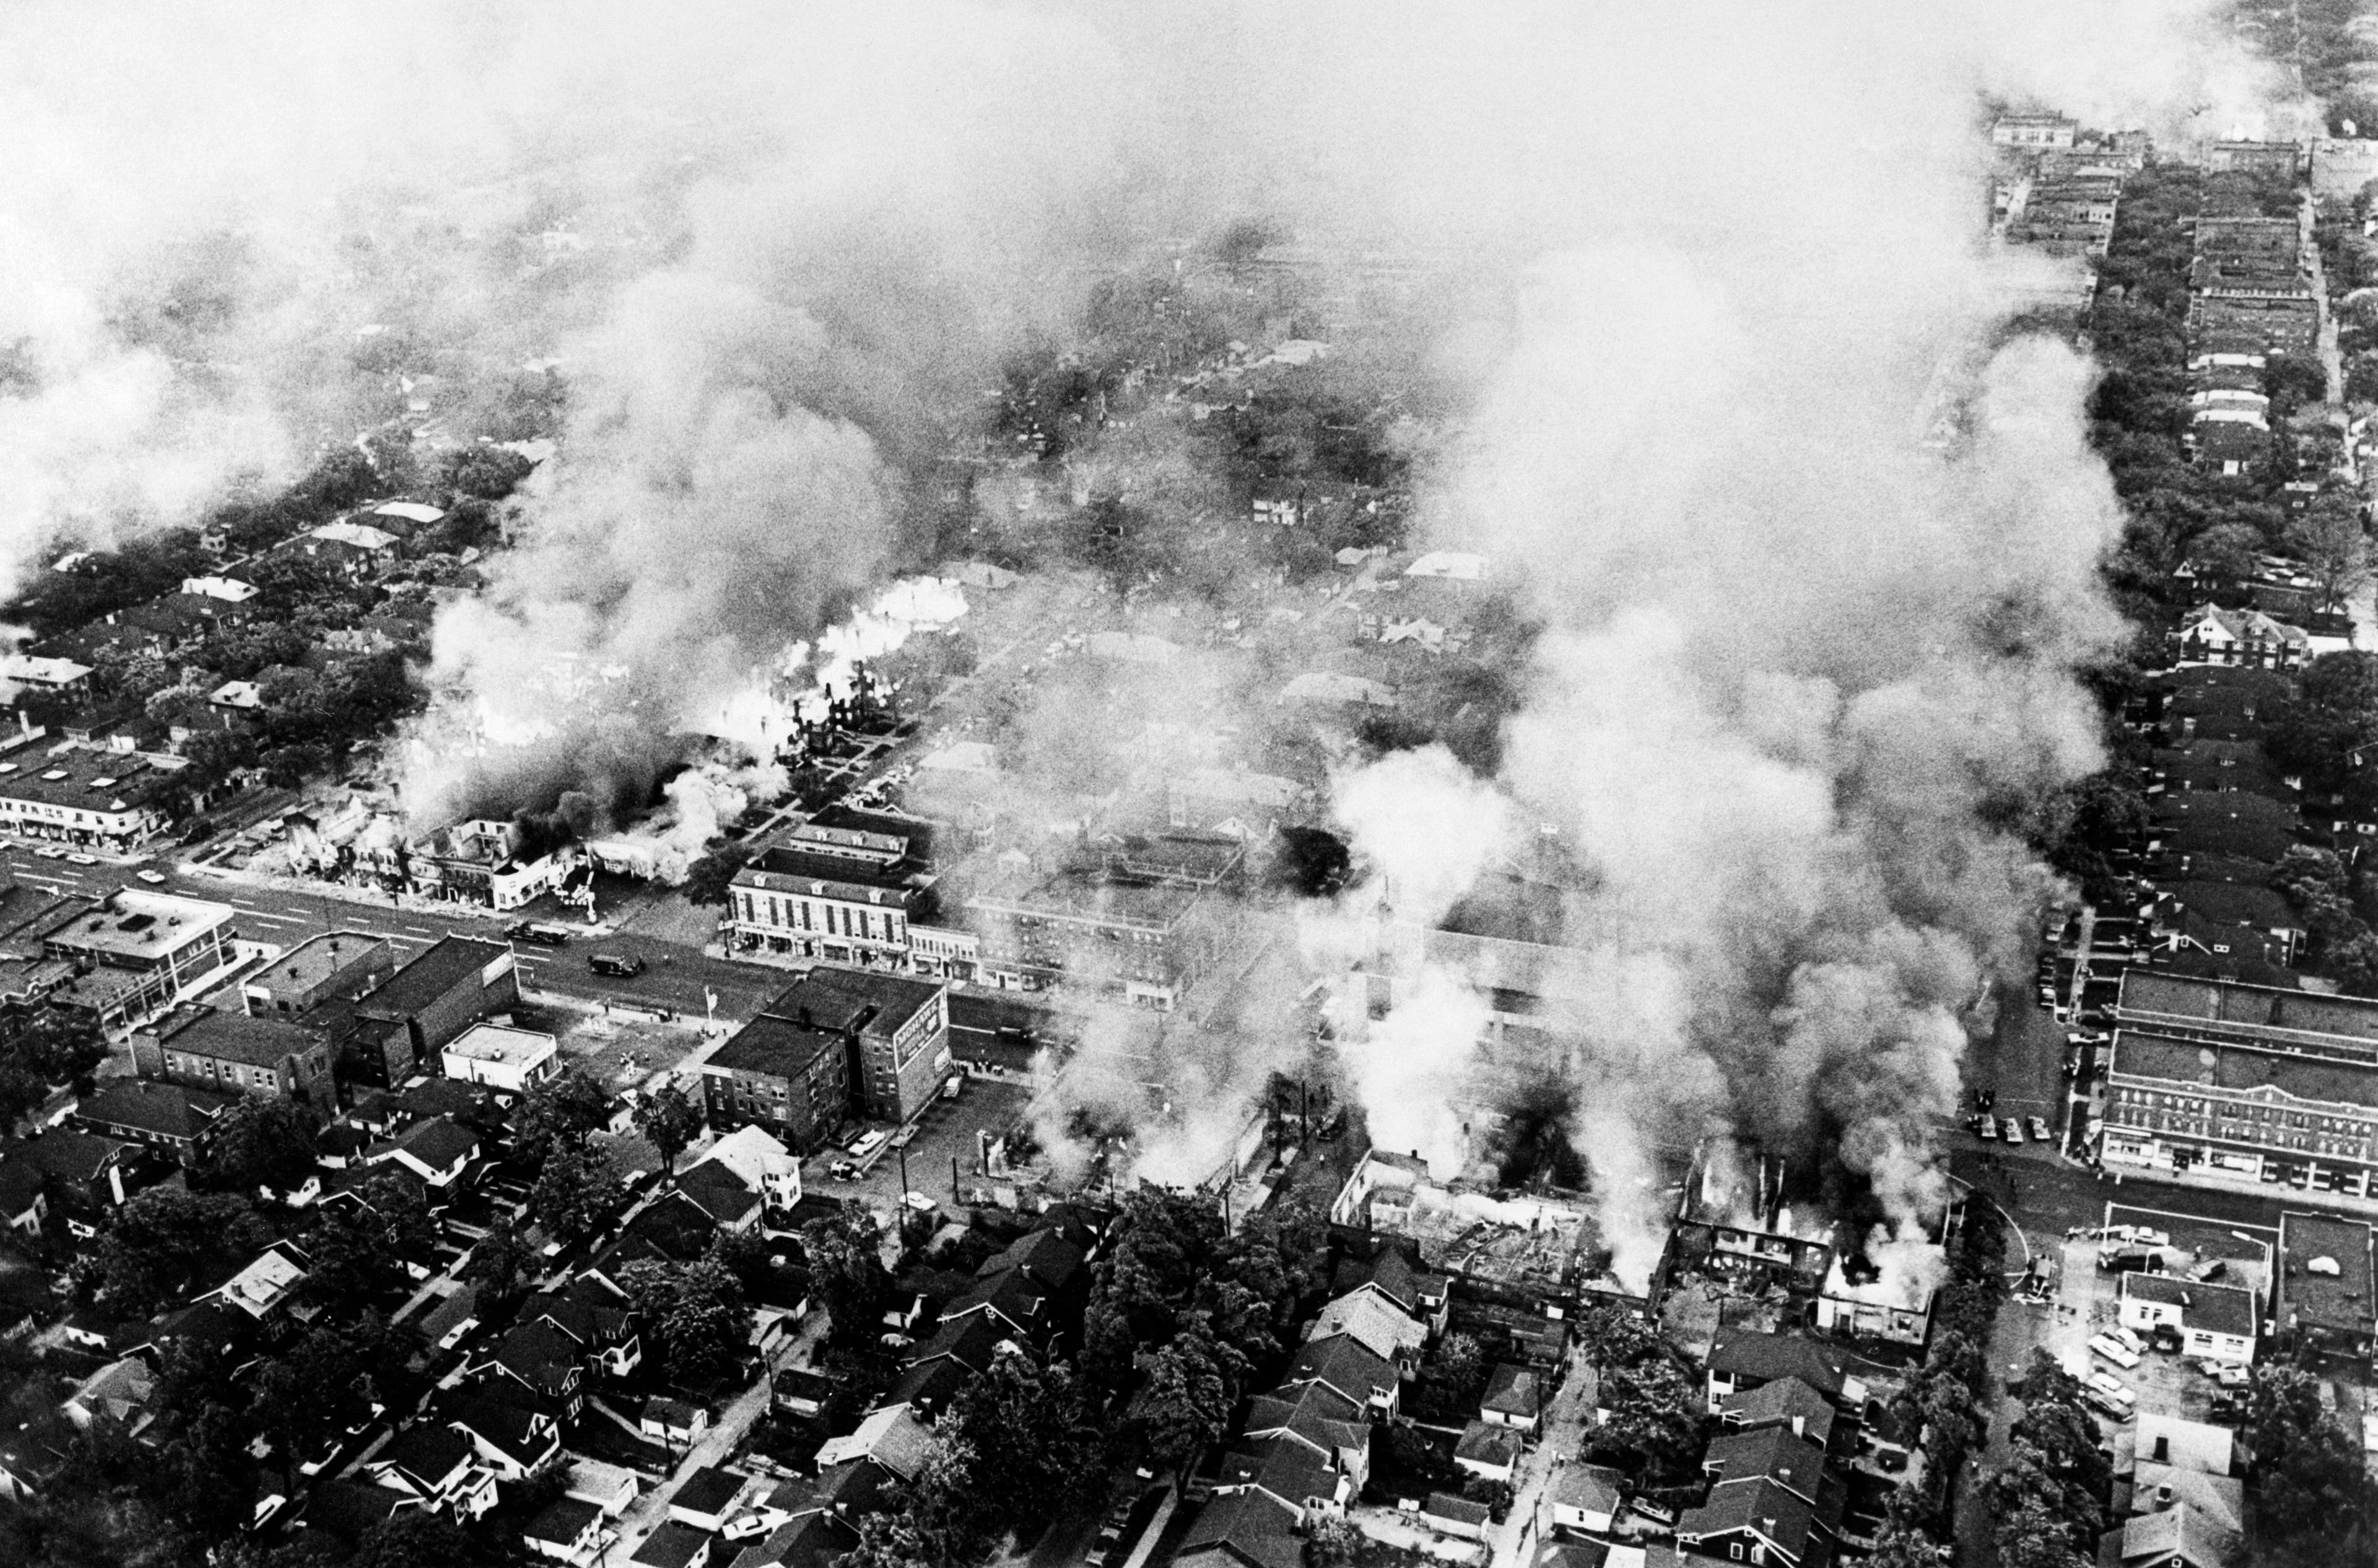 Aerial view of burning buildings in Detroit on July 25, 1967 during riots that erupted in Detroit following a police operation